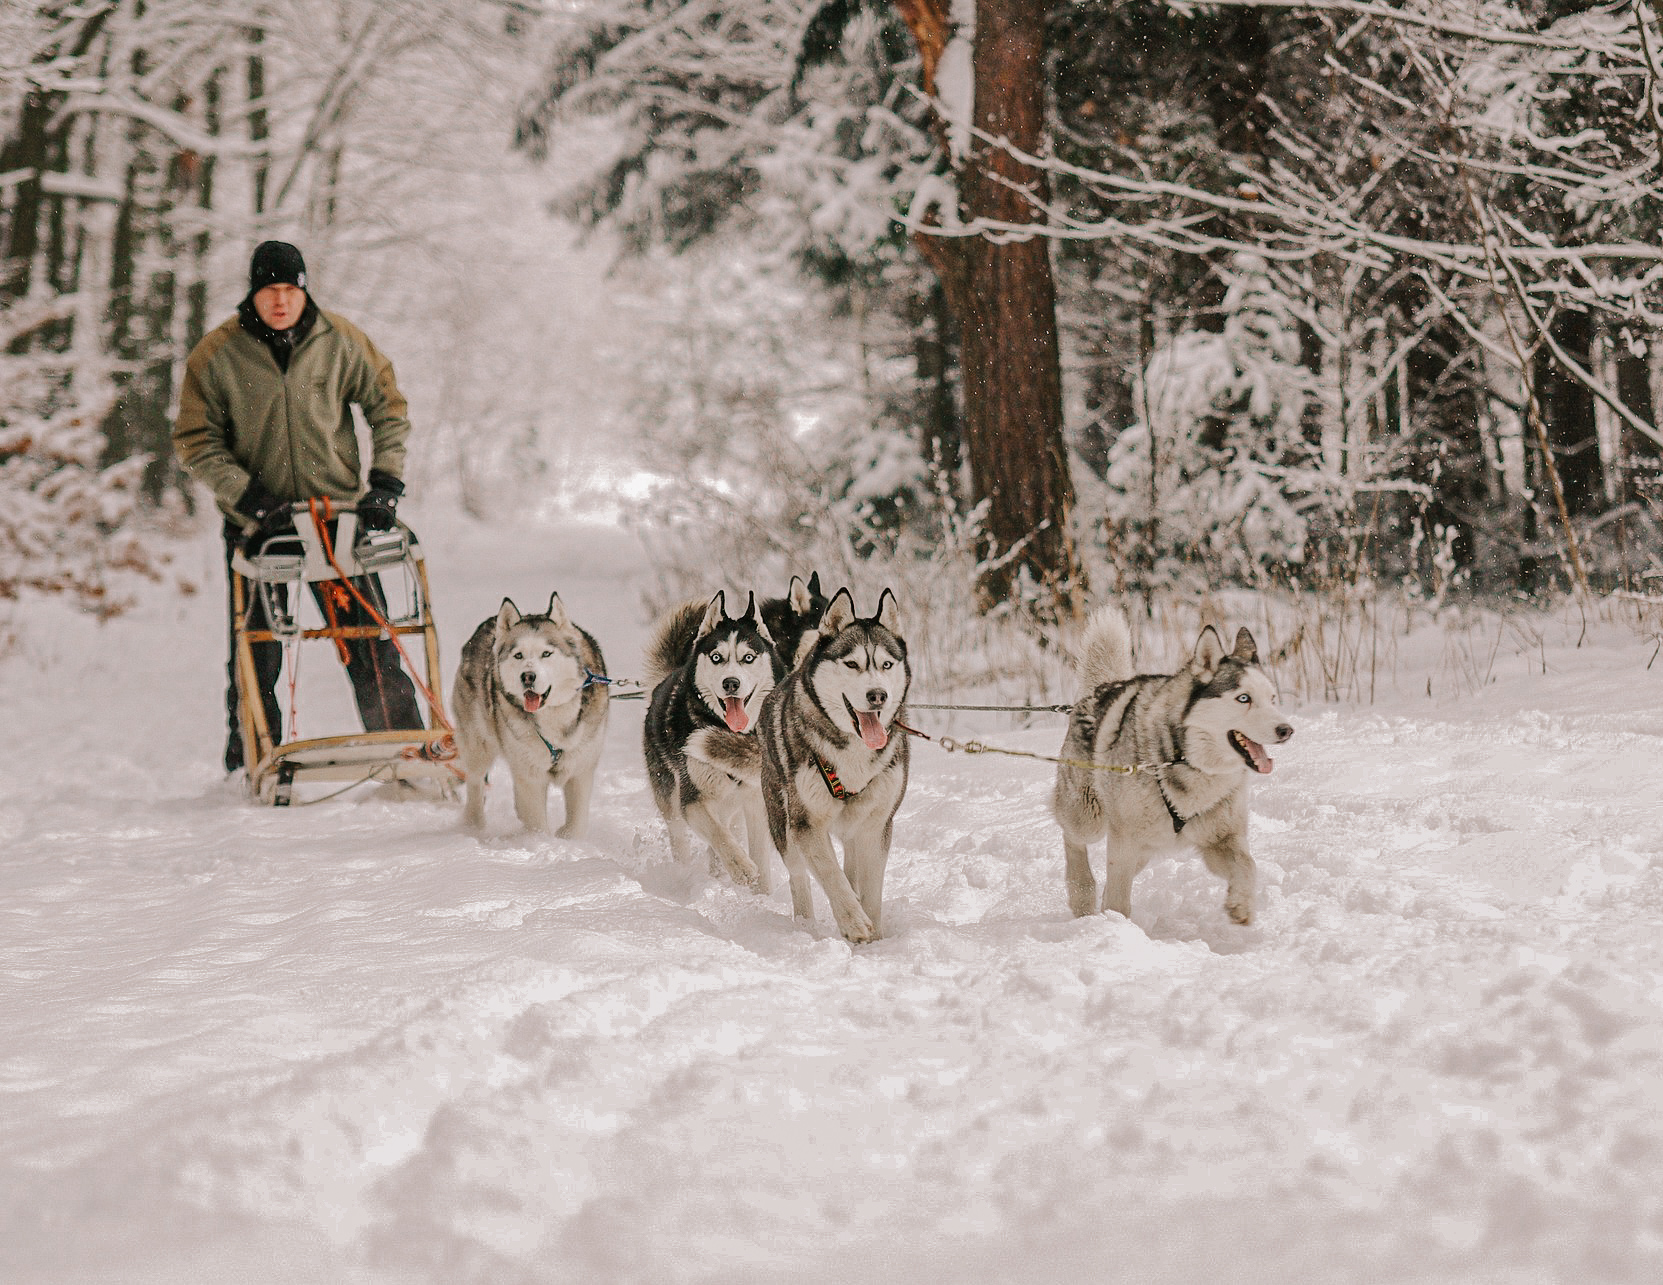 A man on a sled being pulled by 5 huskies, in a snowy area with trees behind them.